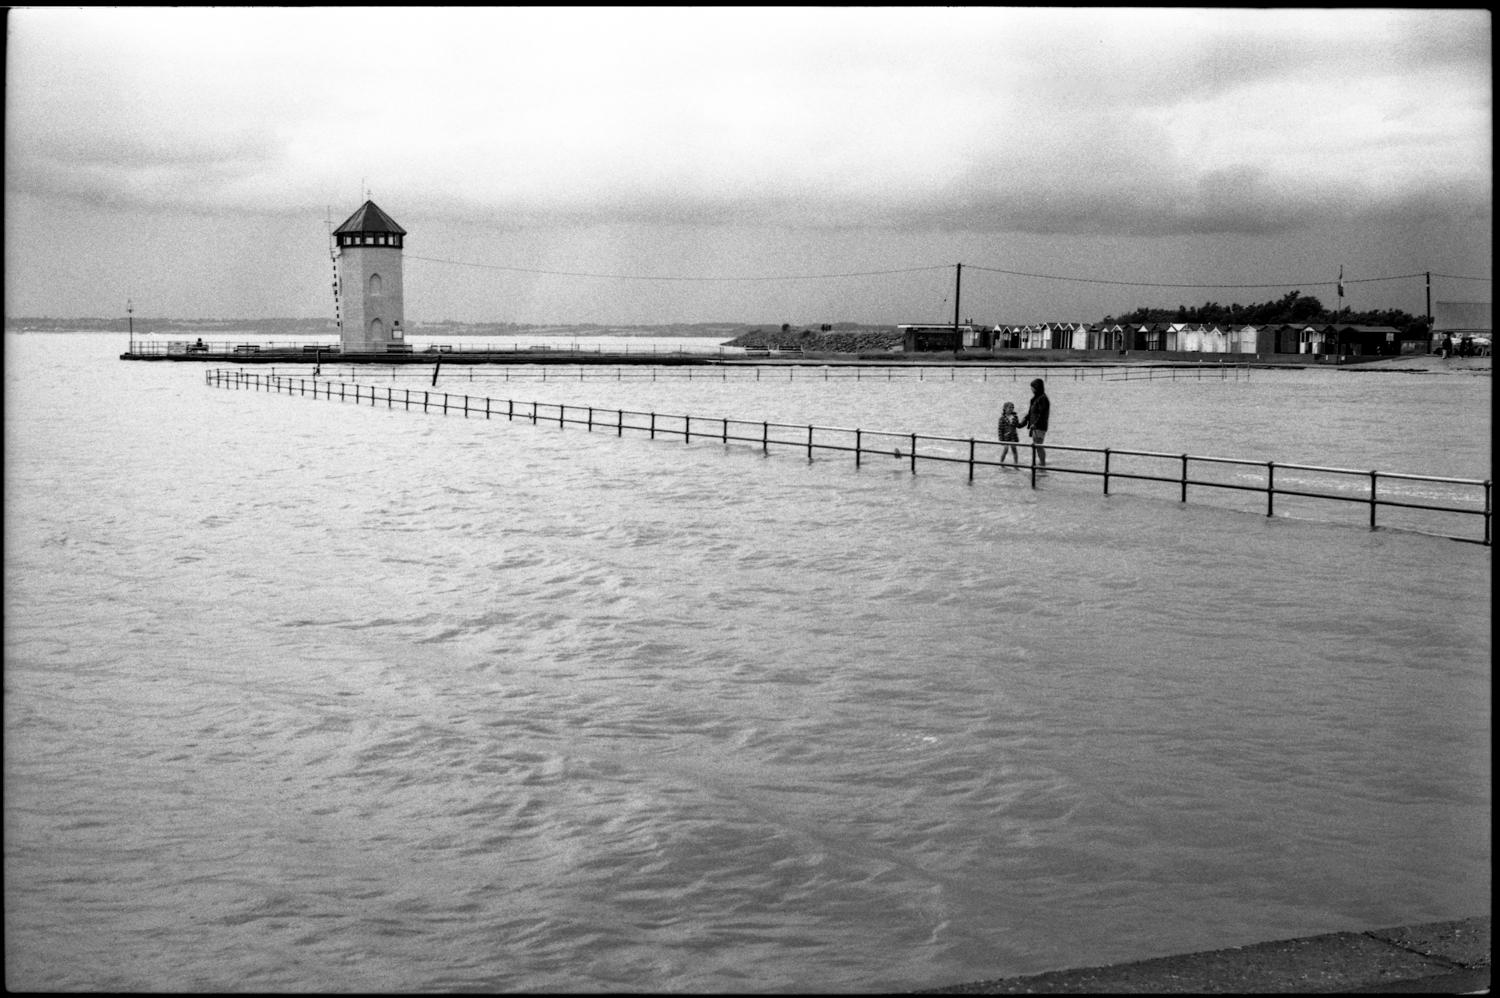 Paul Cooklin Black and White Photograph - Edition 1/10 - Brightlingsea, Essex I, Silver Gelatin Photograph